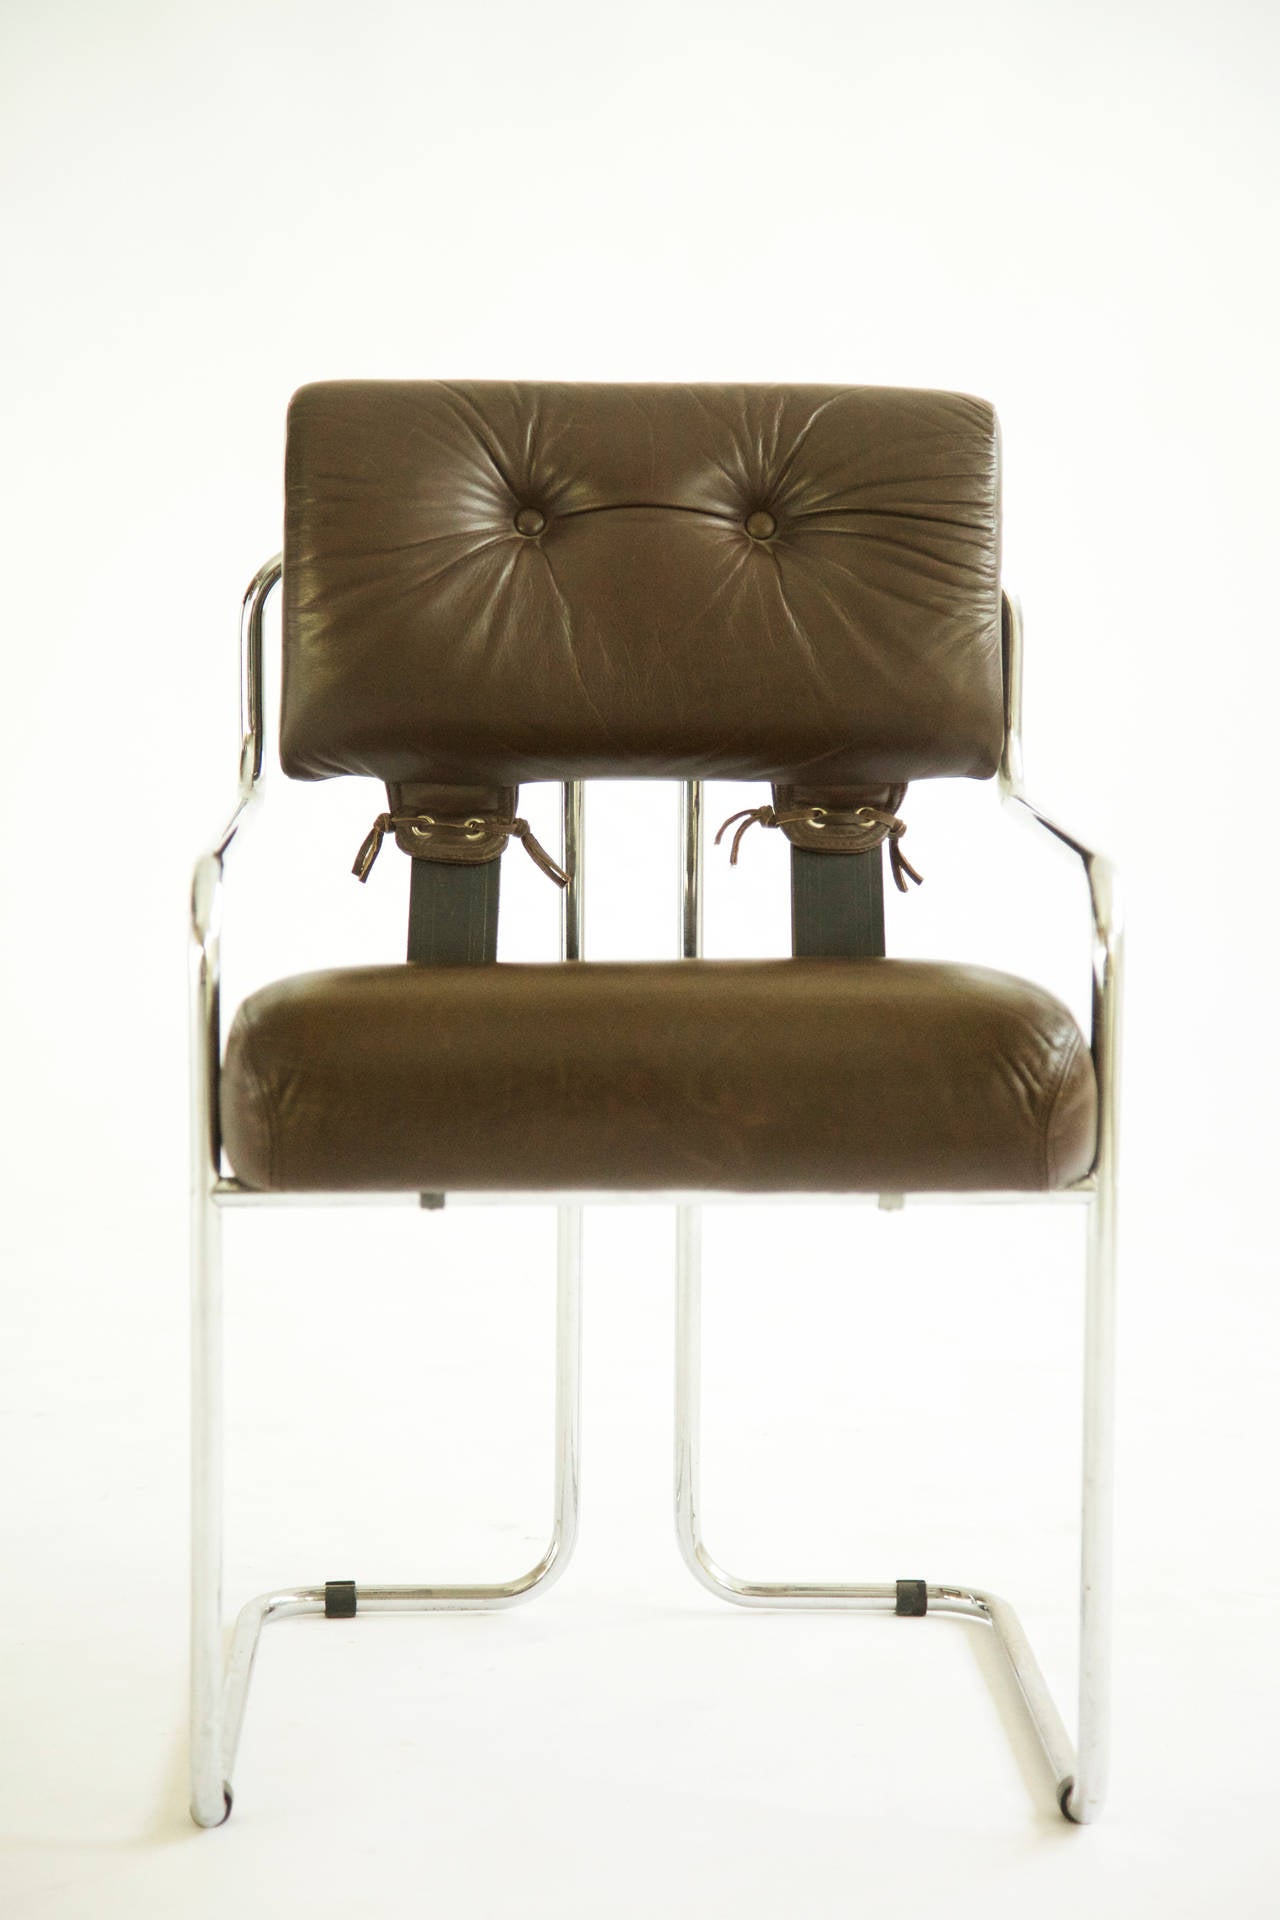 Guido Faleschini for Mariani/Pace Collection dining chairs.
Tubular chrome and brown leather seats and straps.